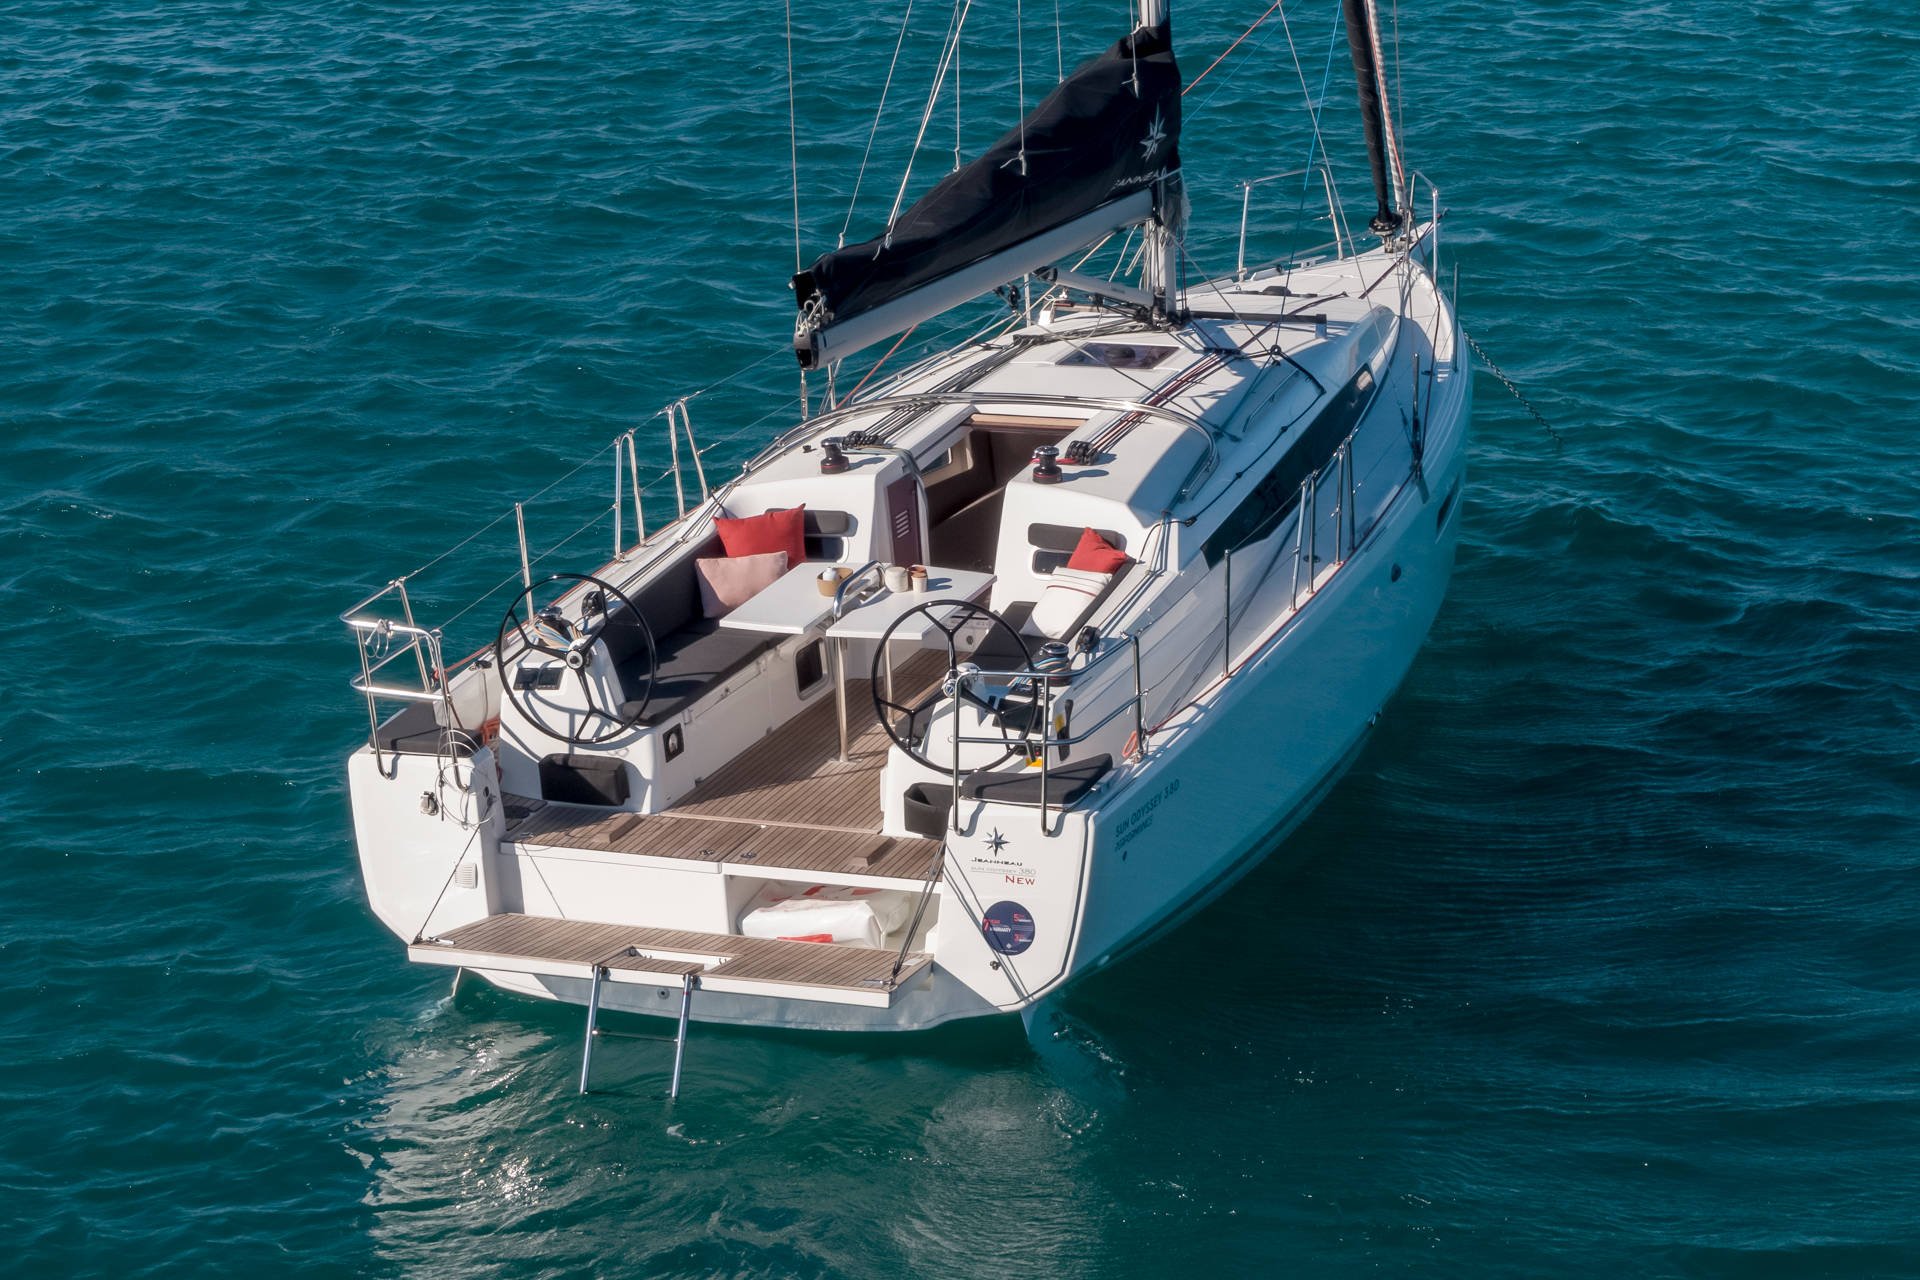 sun-odyssey-380-with-swing-keel-option_61a4f7a696069